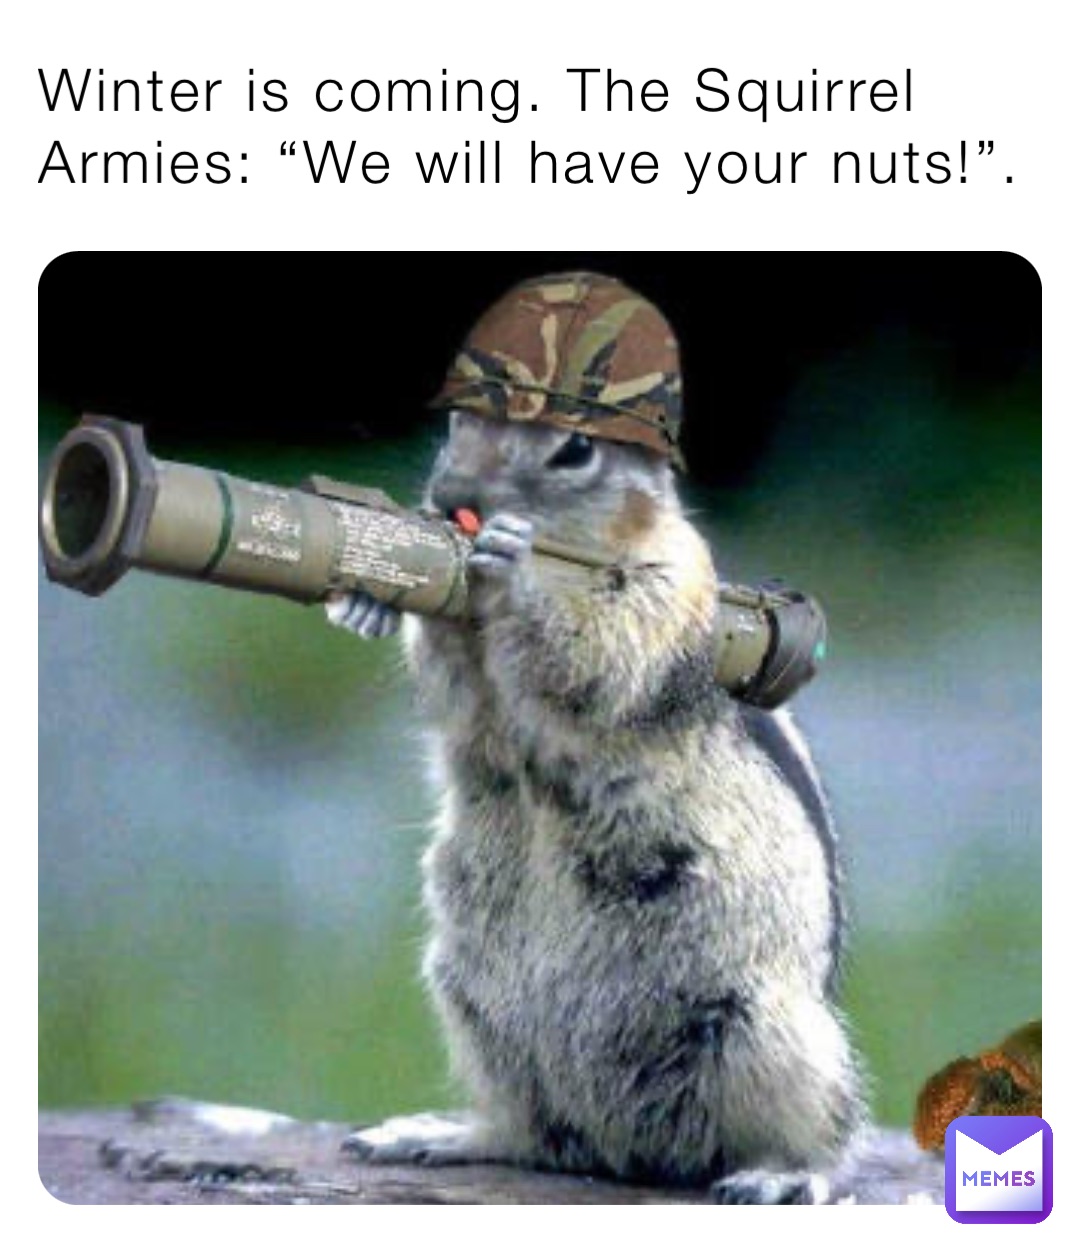 Winter is coming. The Squirrel Armies: “We will have your nuts!”.